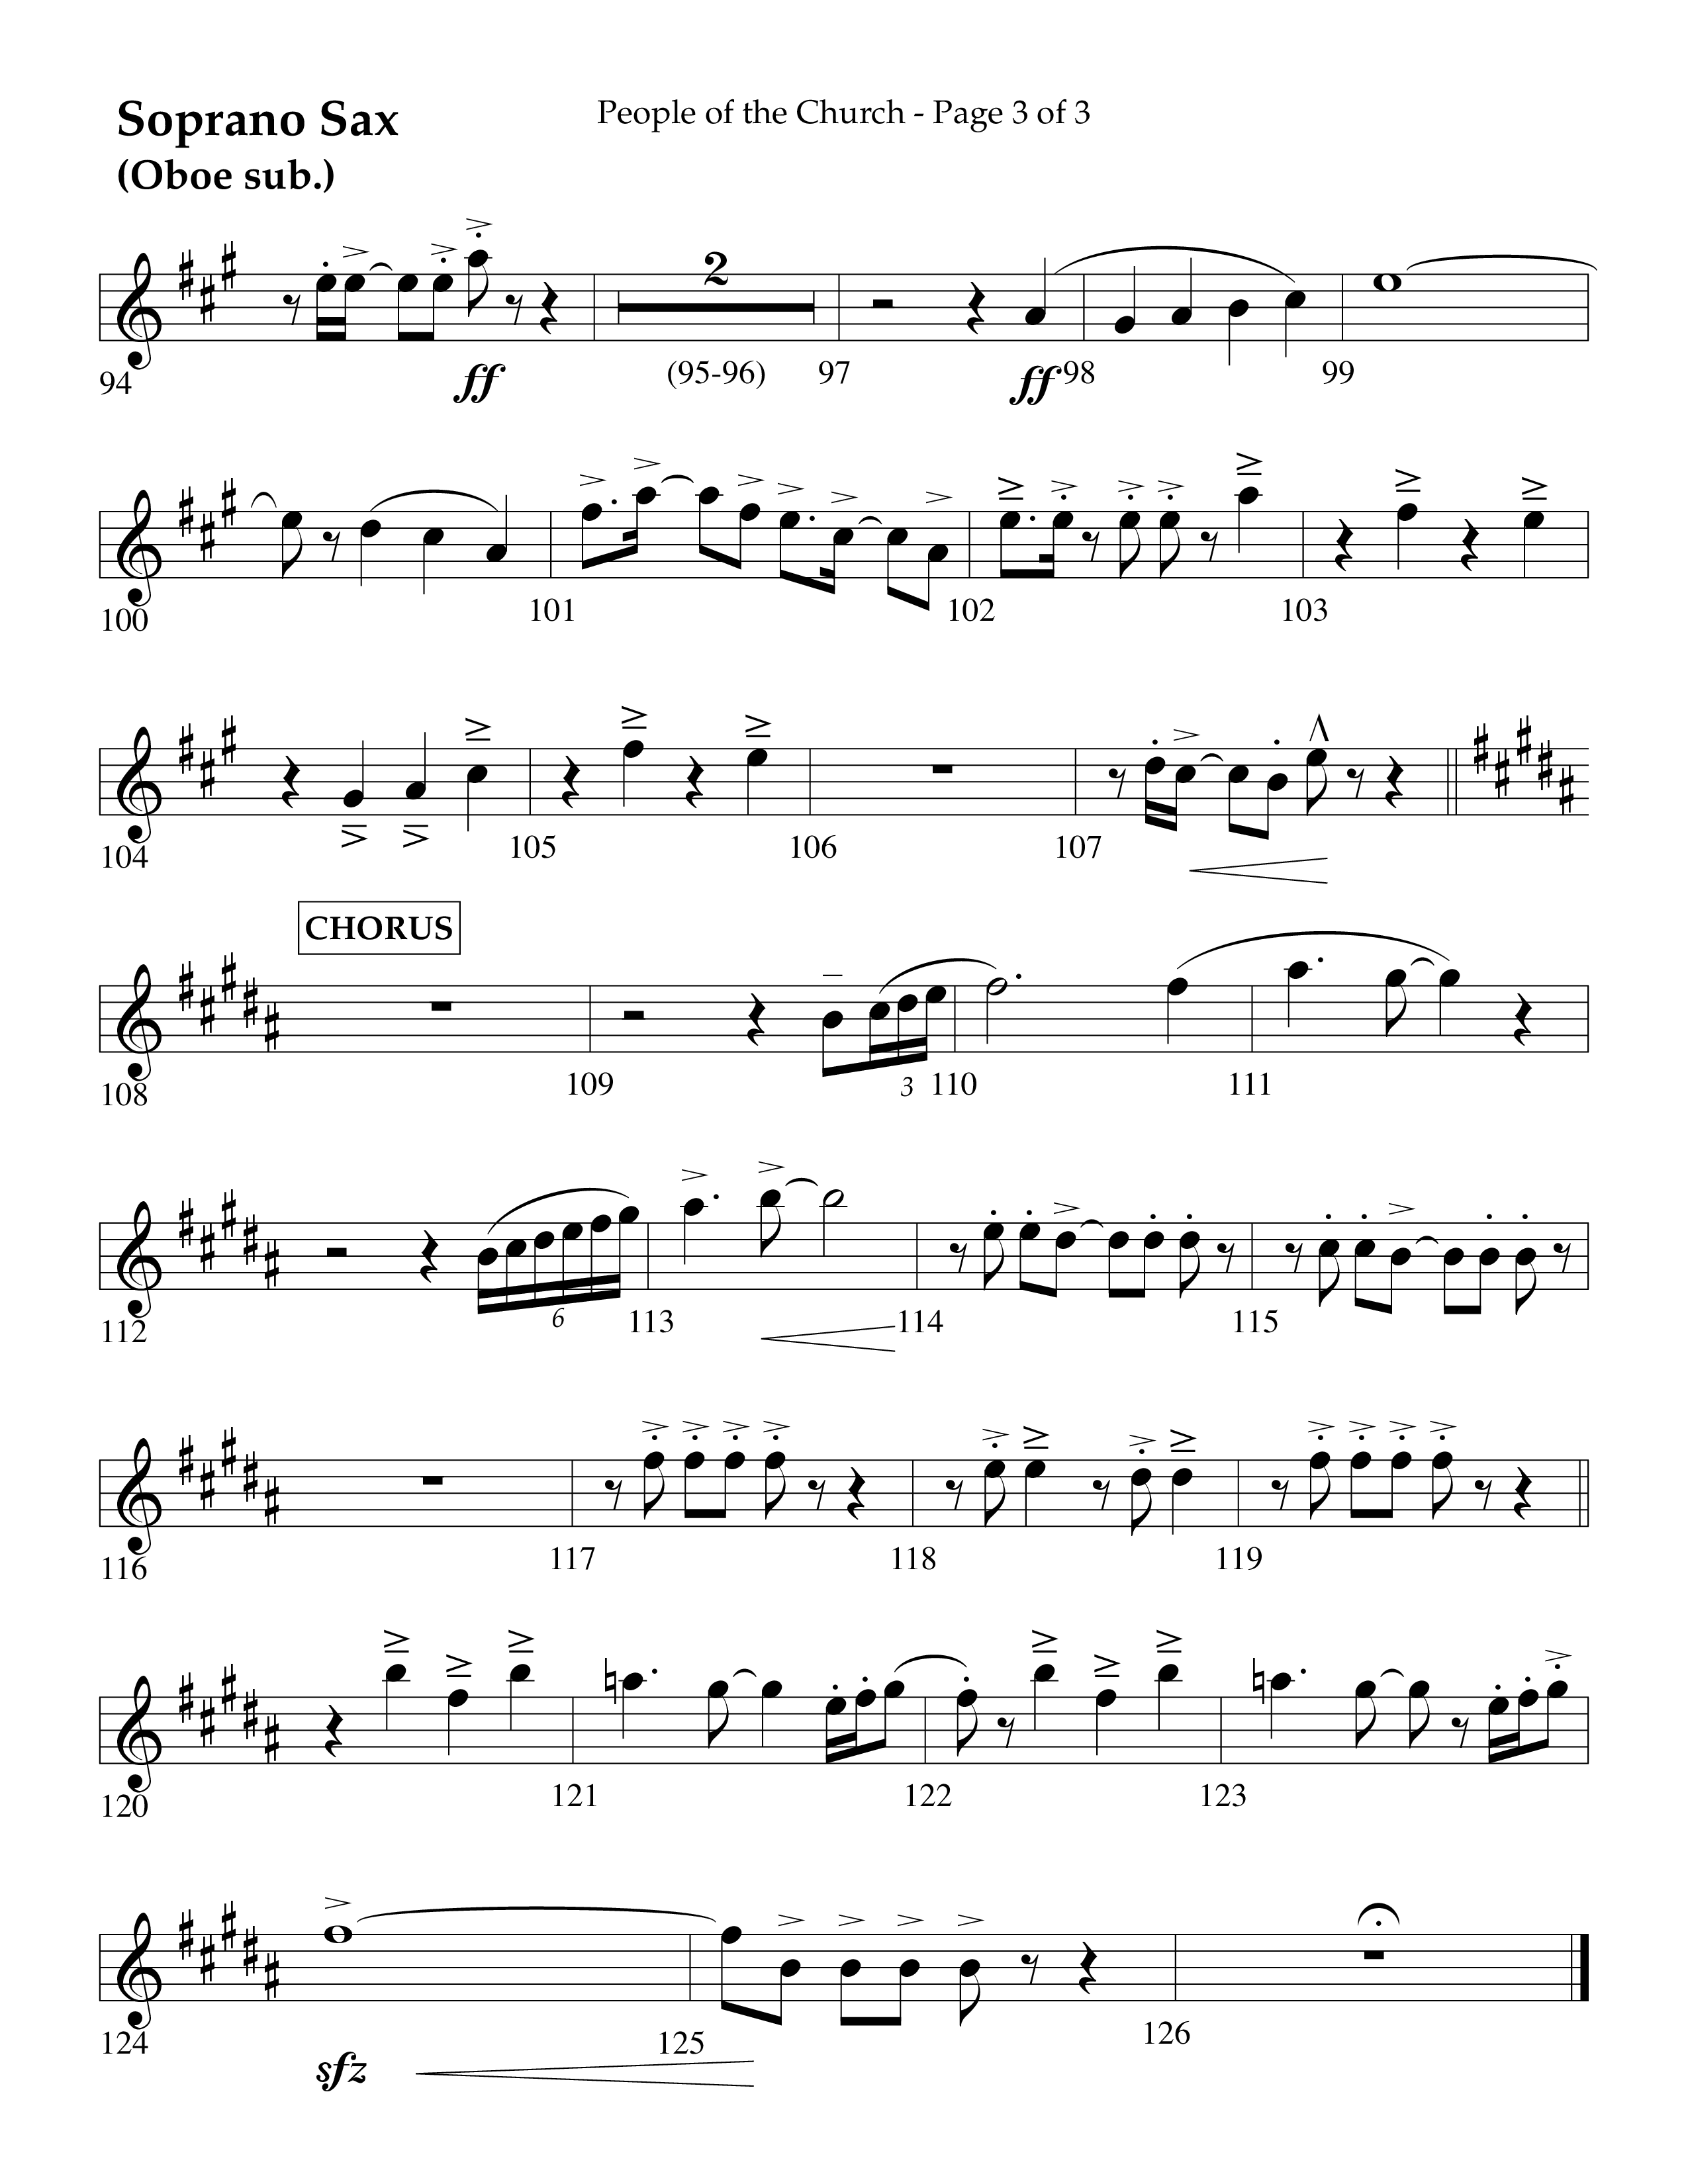 People Of The church (Choral Anthem SATB) Soprano Sax (Lifeway Choral / Arr. Eric Belvin / Arr. John Bolin / Arr. Don Koch / Orch. Danny Mitchell)